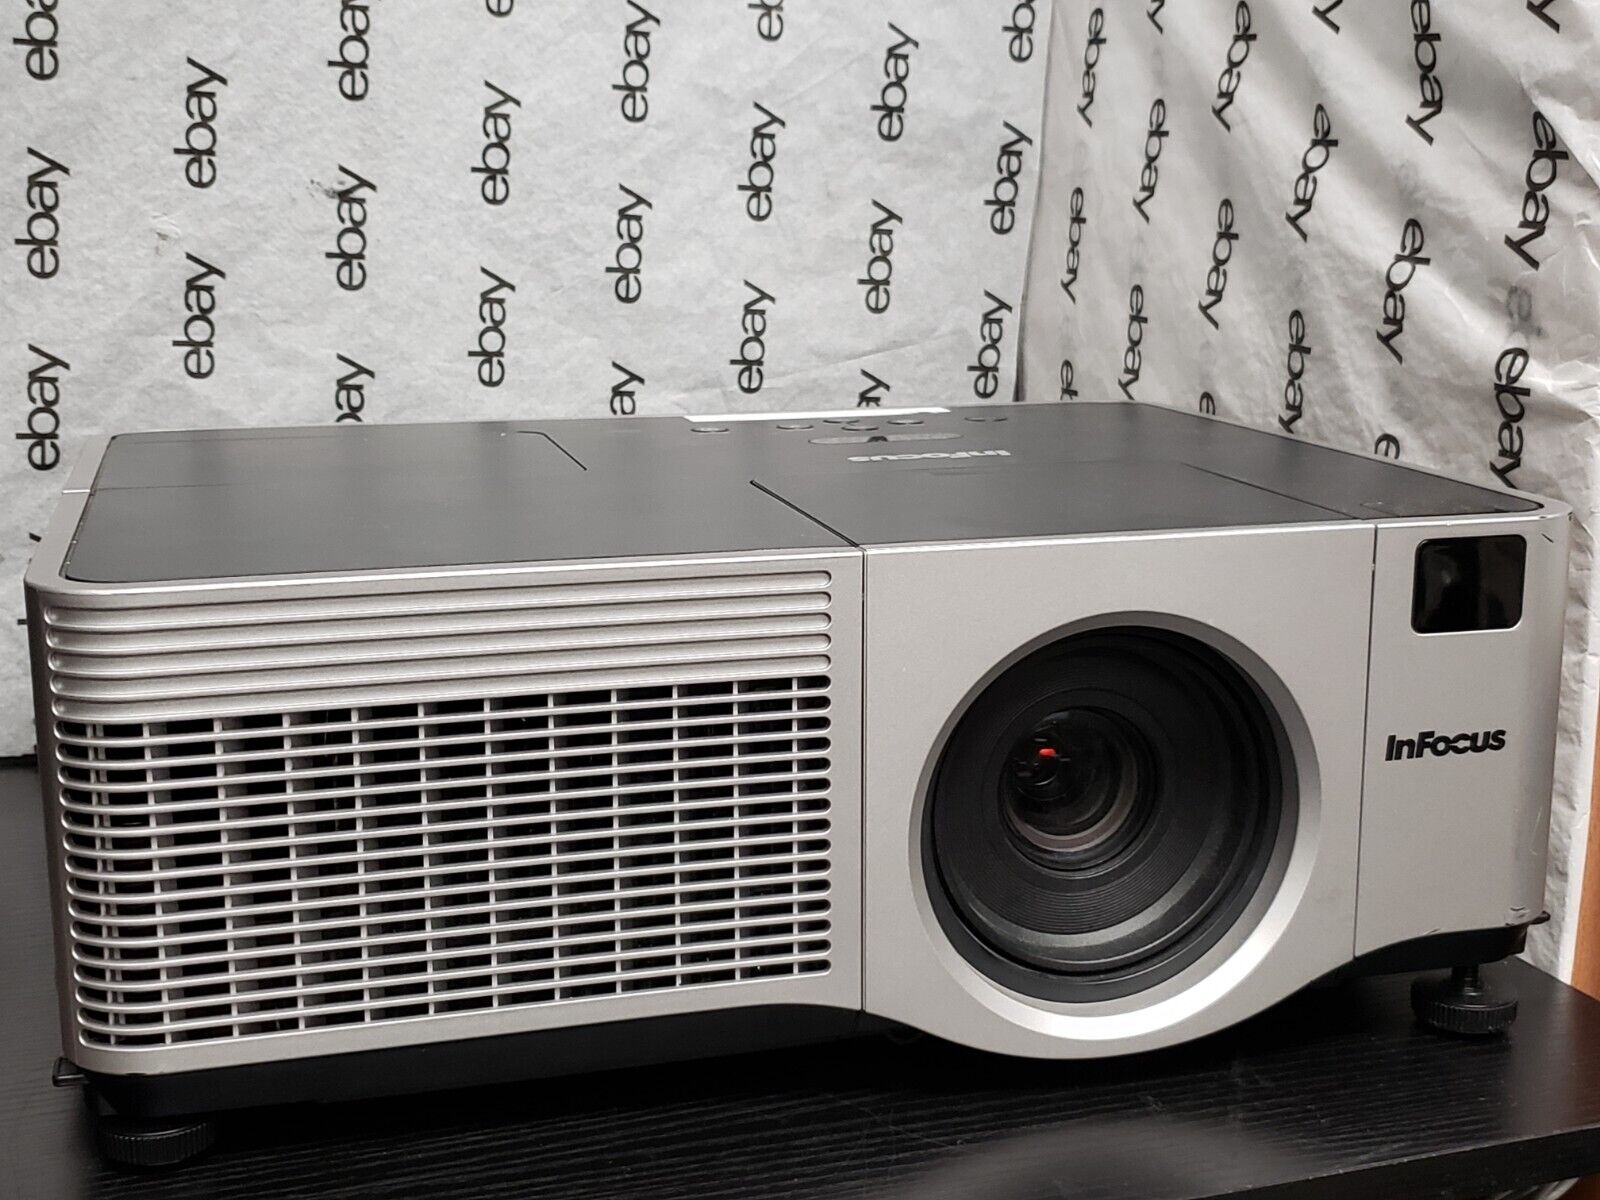 INFOCUS IN5102 LCD PROJECTOR 4000 LUMENS (4464 LAMP HOURS)